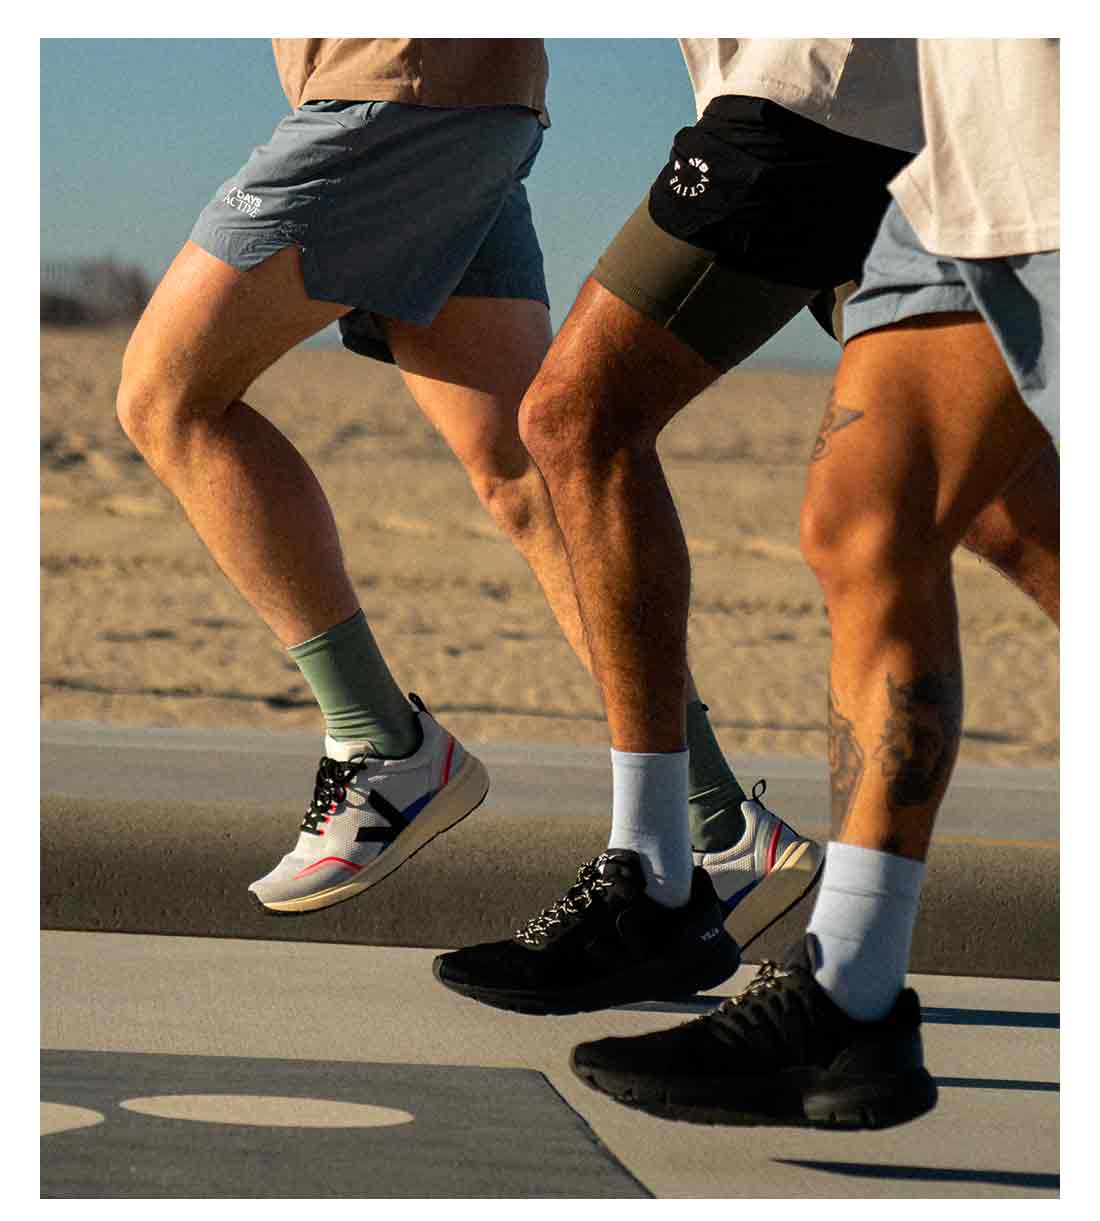 Focus on the legs of three runners 